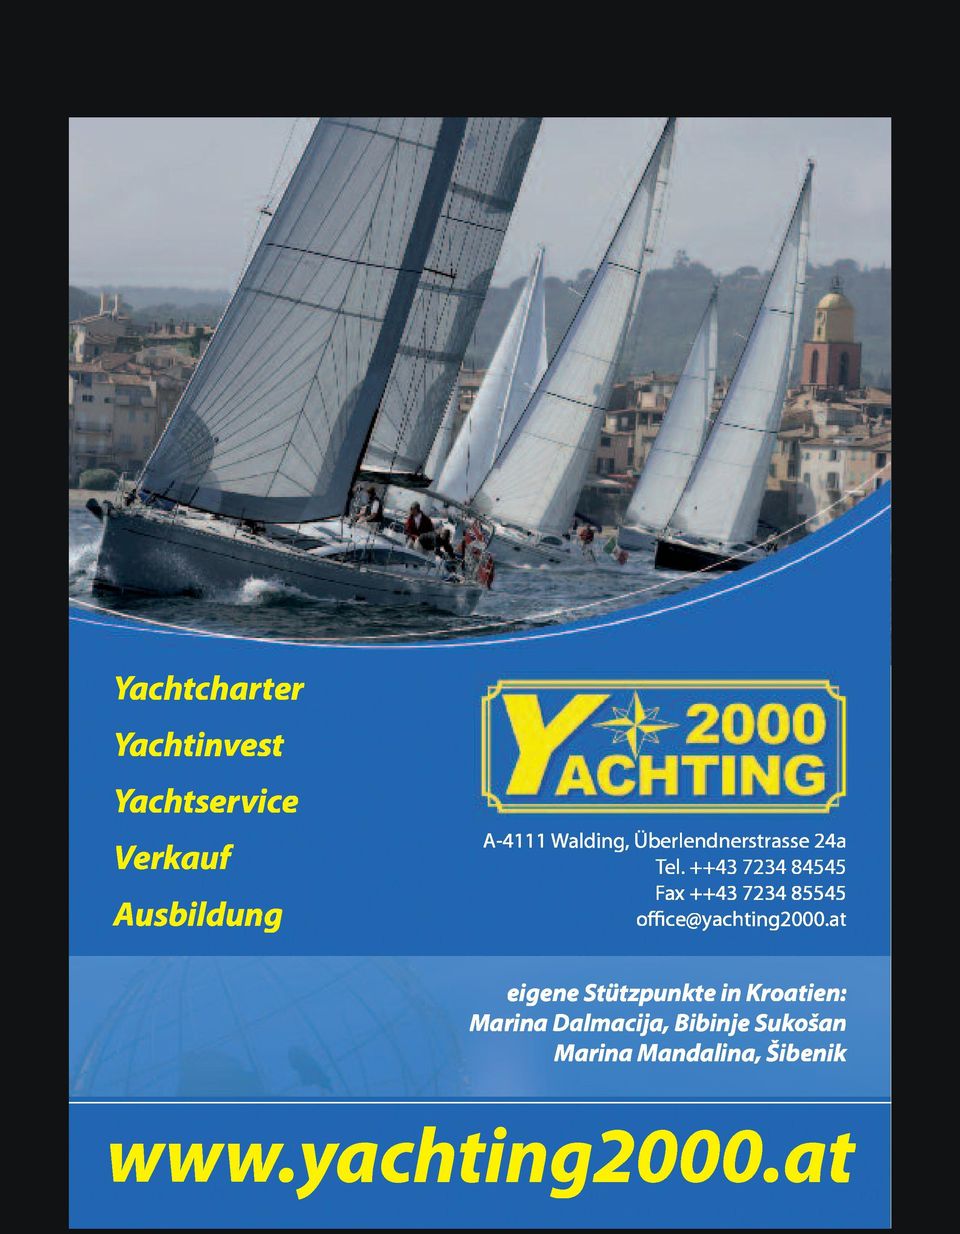 ++43 7234 84545 Fax ++43 7234 85545 office@yachting2000.